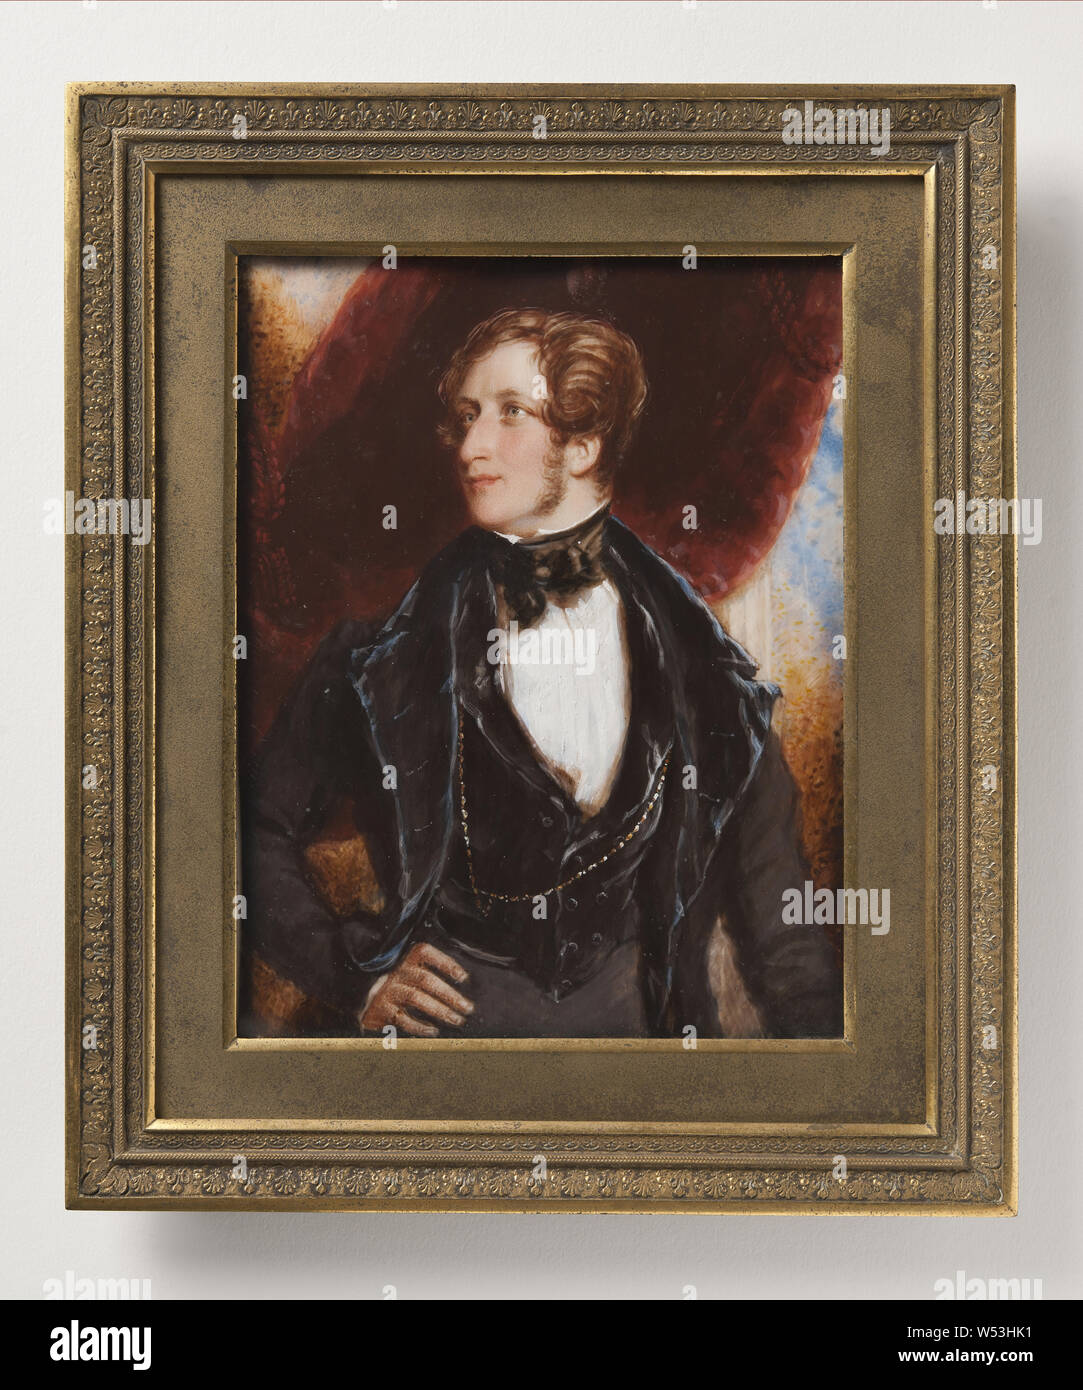 Simon-Jacques Rochard, Frederick William Robert Stewart, 4th Marquess of Londonderry, 1805-1872, 4th marquee of Londonderry, painting, 1833, Watercolor on ivory, Watercolor, on ivory, Height, 15.6 cm (6.1 inches), Width, 12 cm (4.7 inches), Inscription, Frederick 2nd Viscount Castlereaghl, to Thomas Tardrew - 1843 February, ram verso, Signing, Rochard pinx 1833, left long side Stock Photo